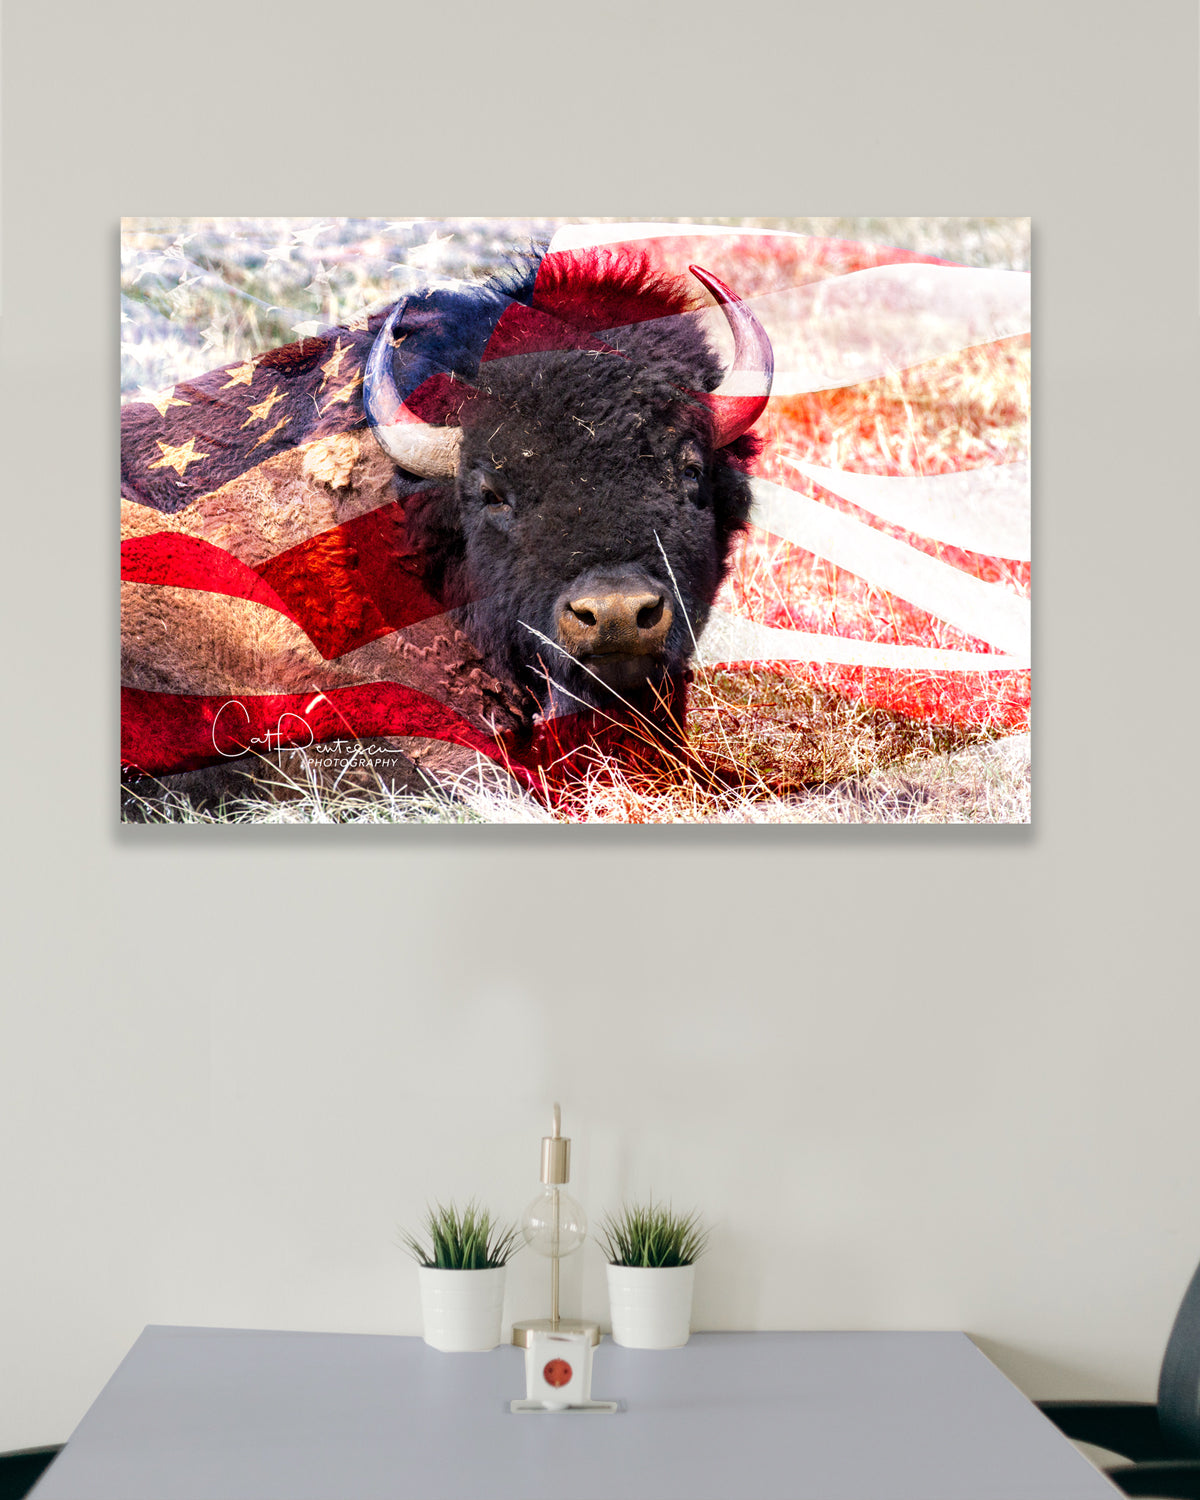 Buffalo inlaid in the American flag in an office.